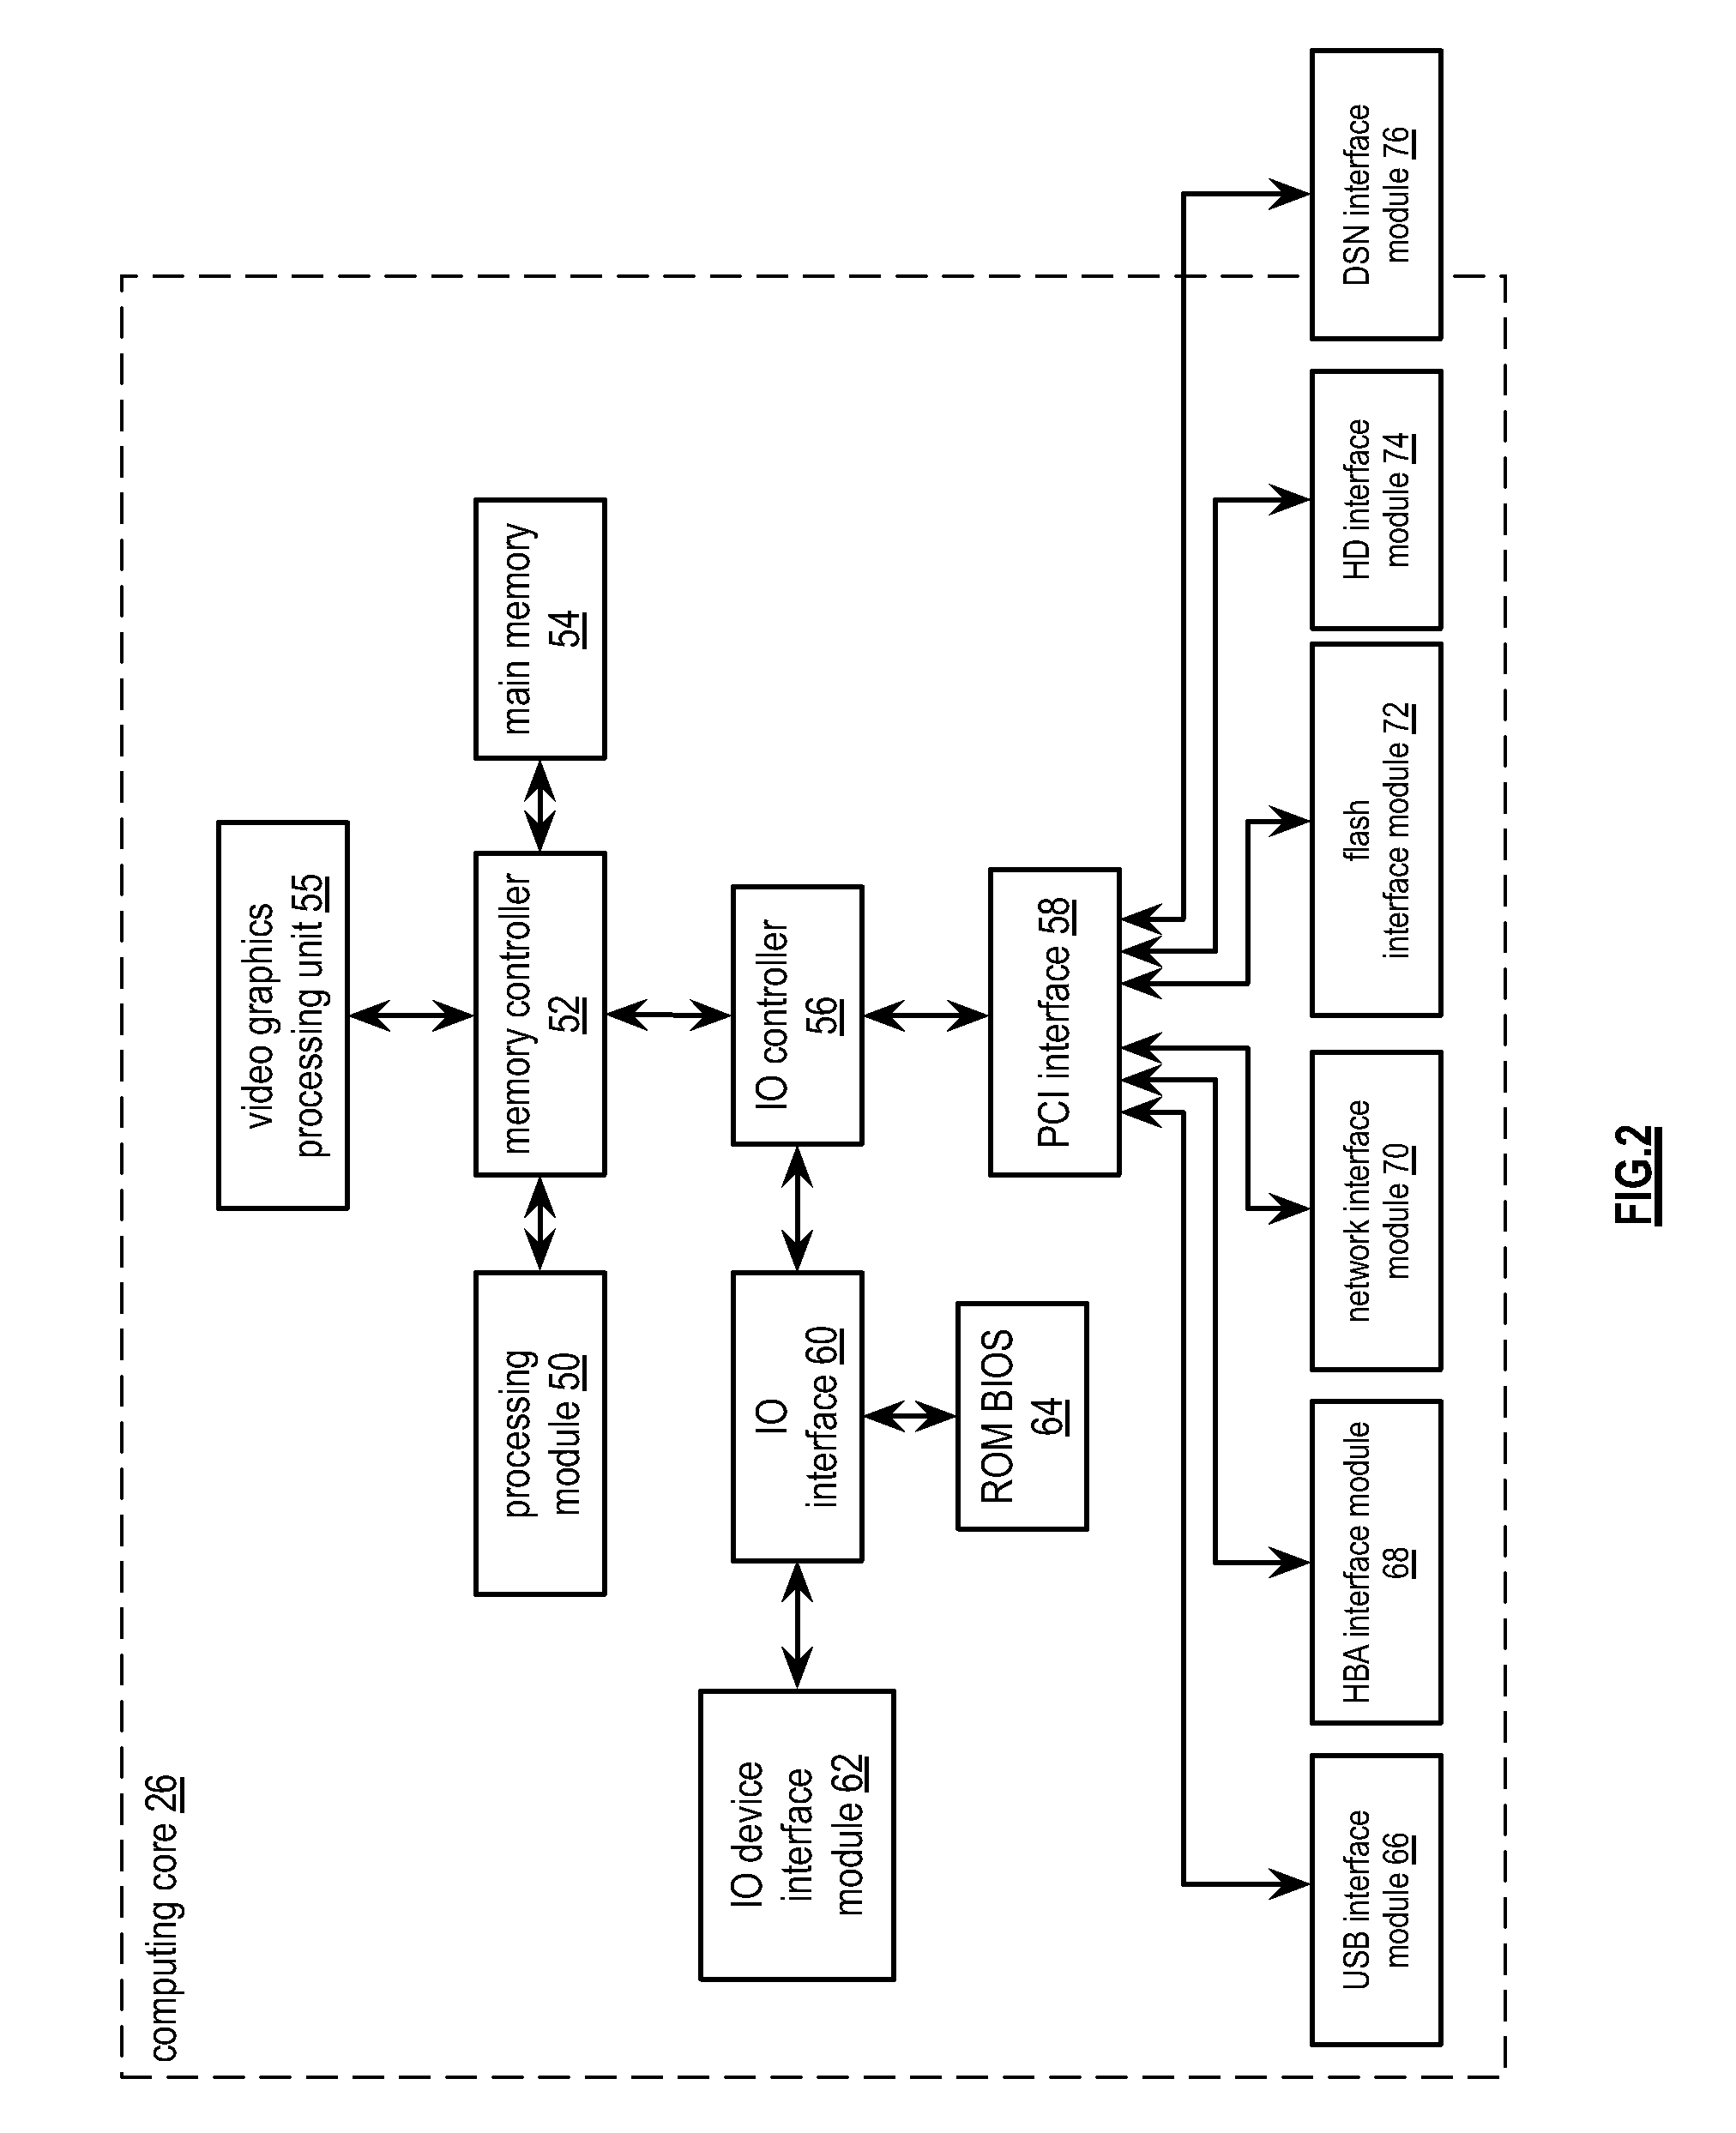 Pessimistic data reading in a dispersed storage network